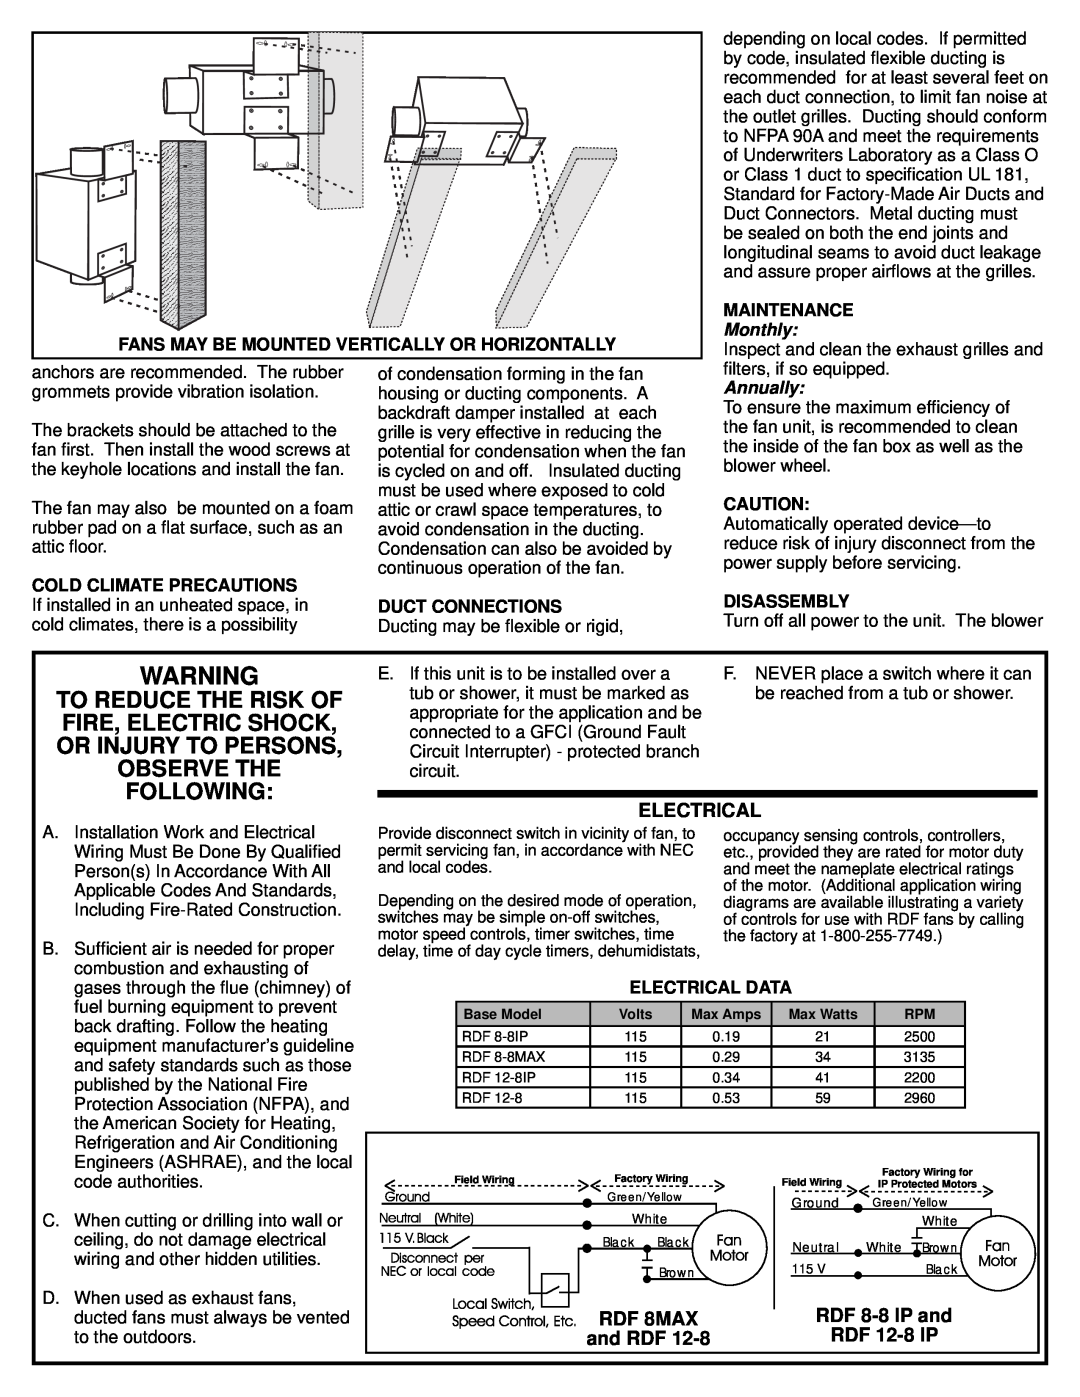 American Aldes installation instructions Electrical, RDF 8-8IP and, and RDF, RDF 12-8IP, Monthly, Annually, RDF 8MAX 